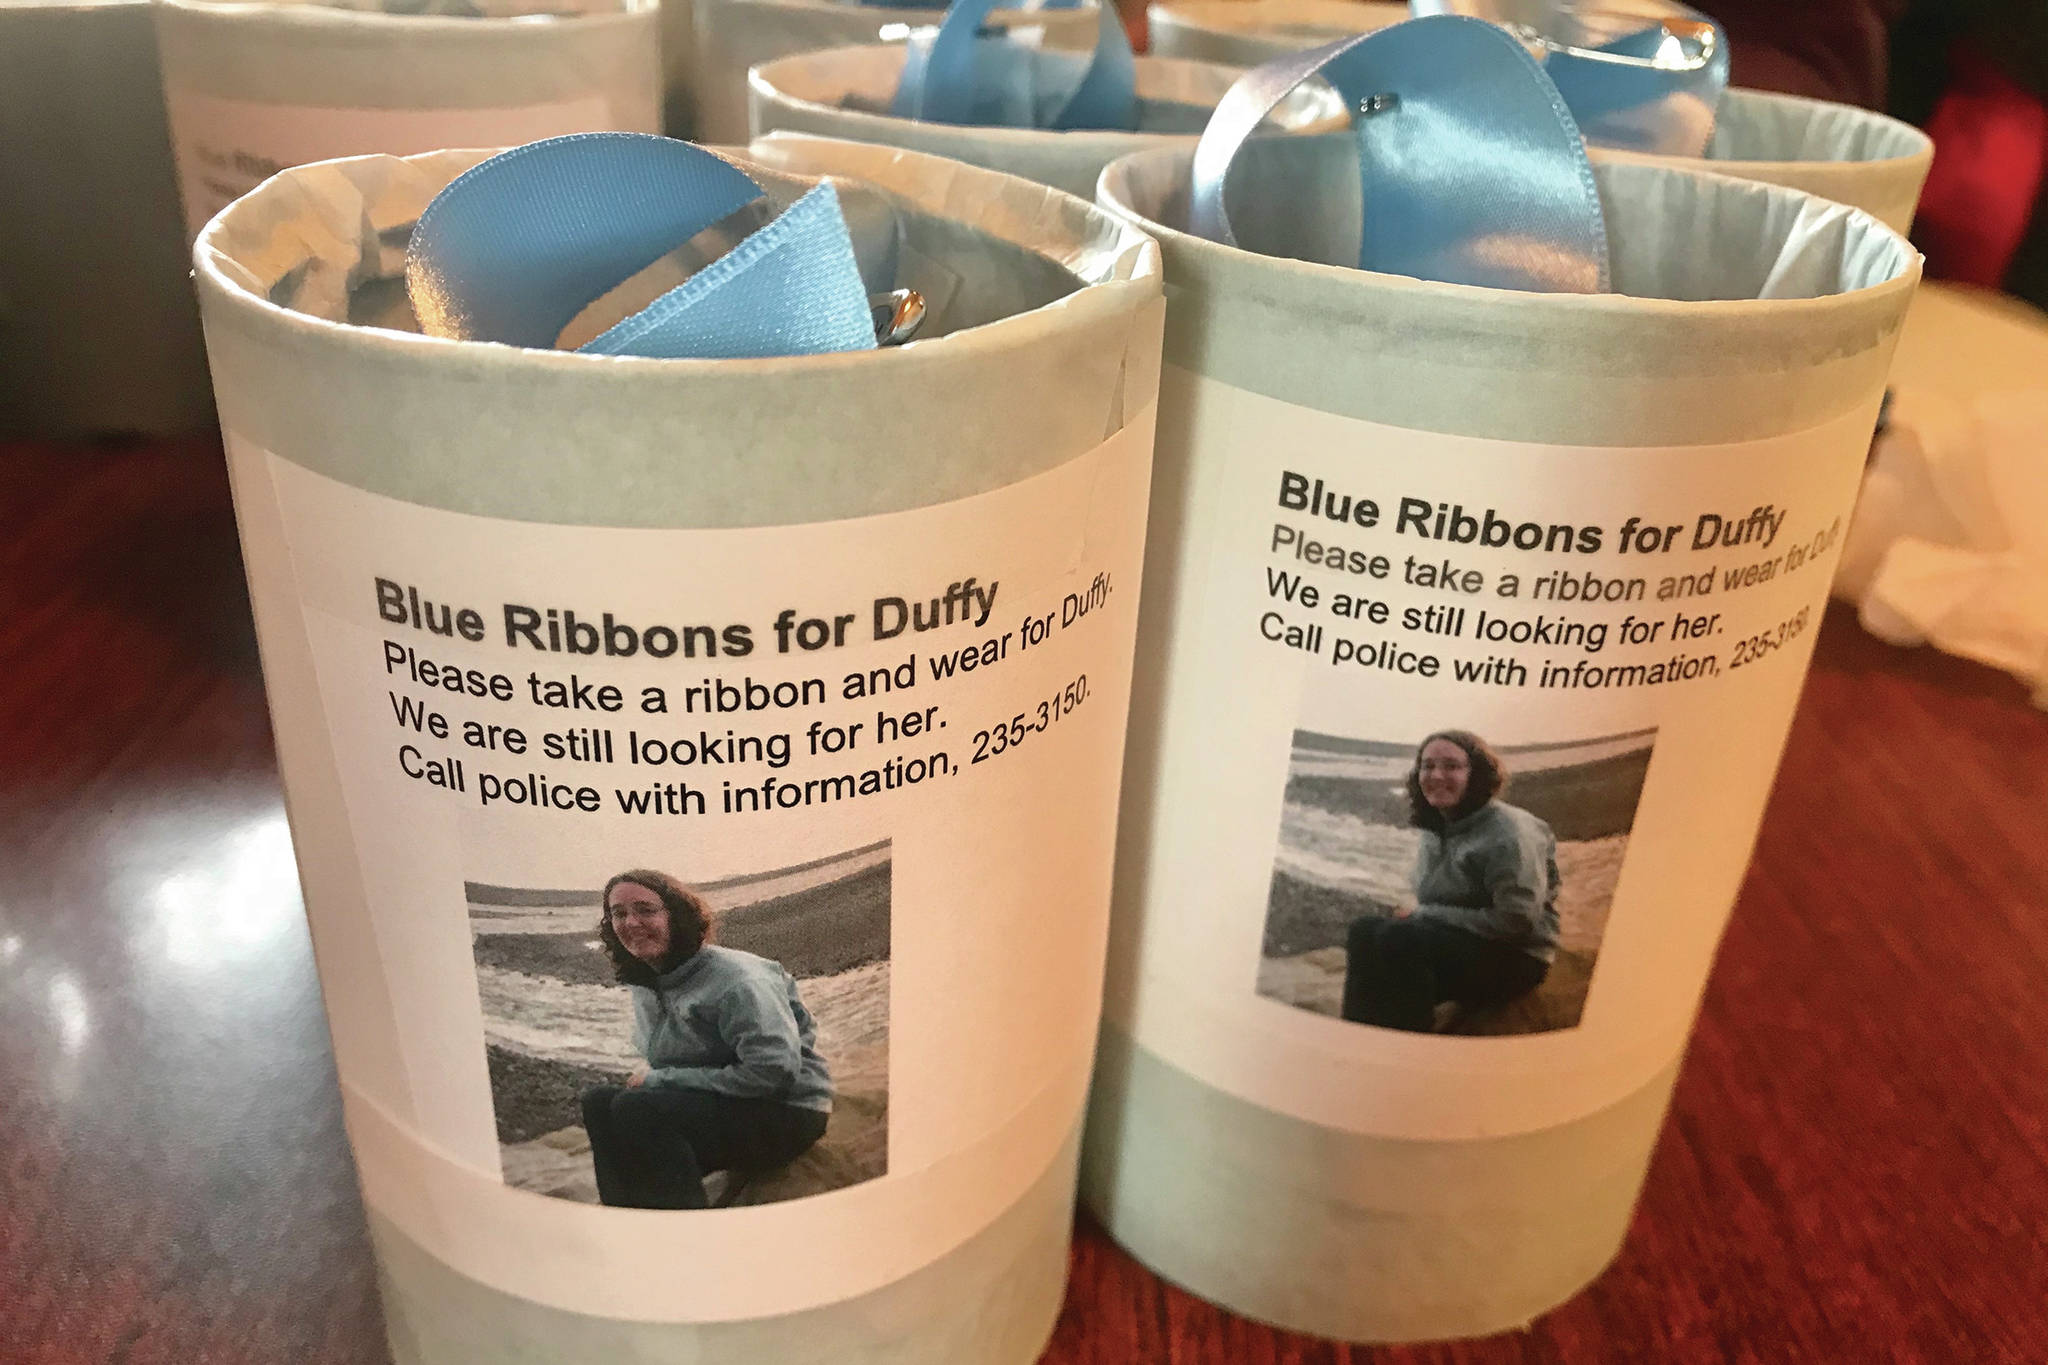 Photo courtesy of Christina Whiting                                Tins with blue ribbons were placed on Feb. 26, 2020, around Homer, Alaska, for people to wear as part of an awareness campaign for a missing Homer woman, Anesha “Duffy” Murnane, missing since Oct. 17, 2019.